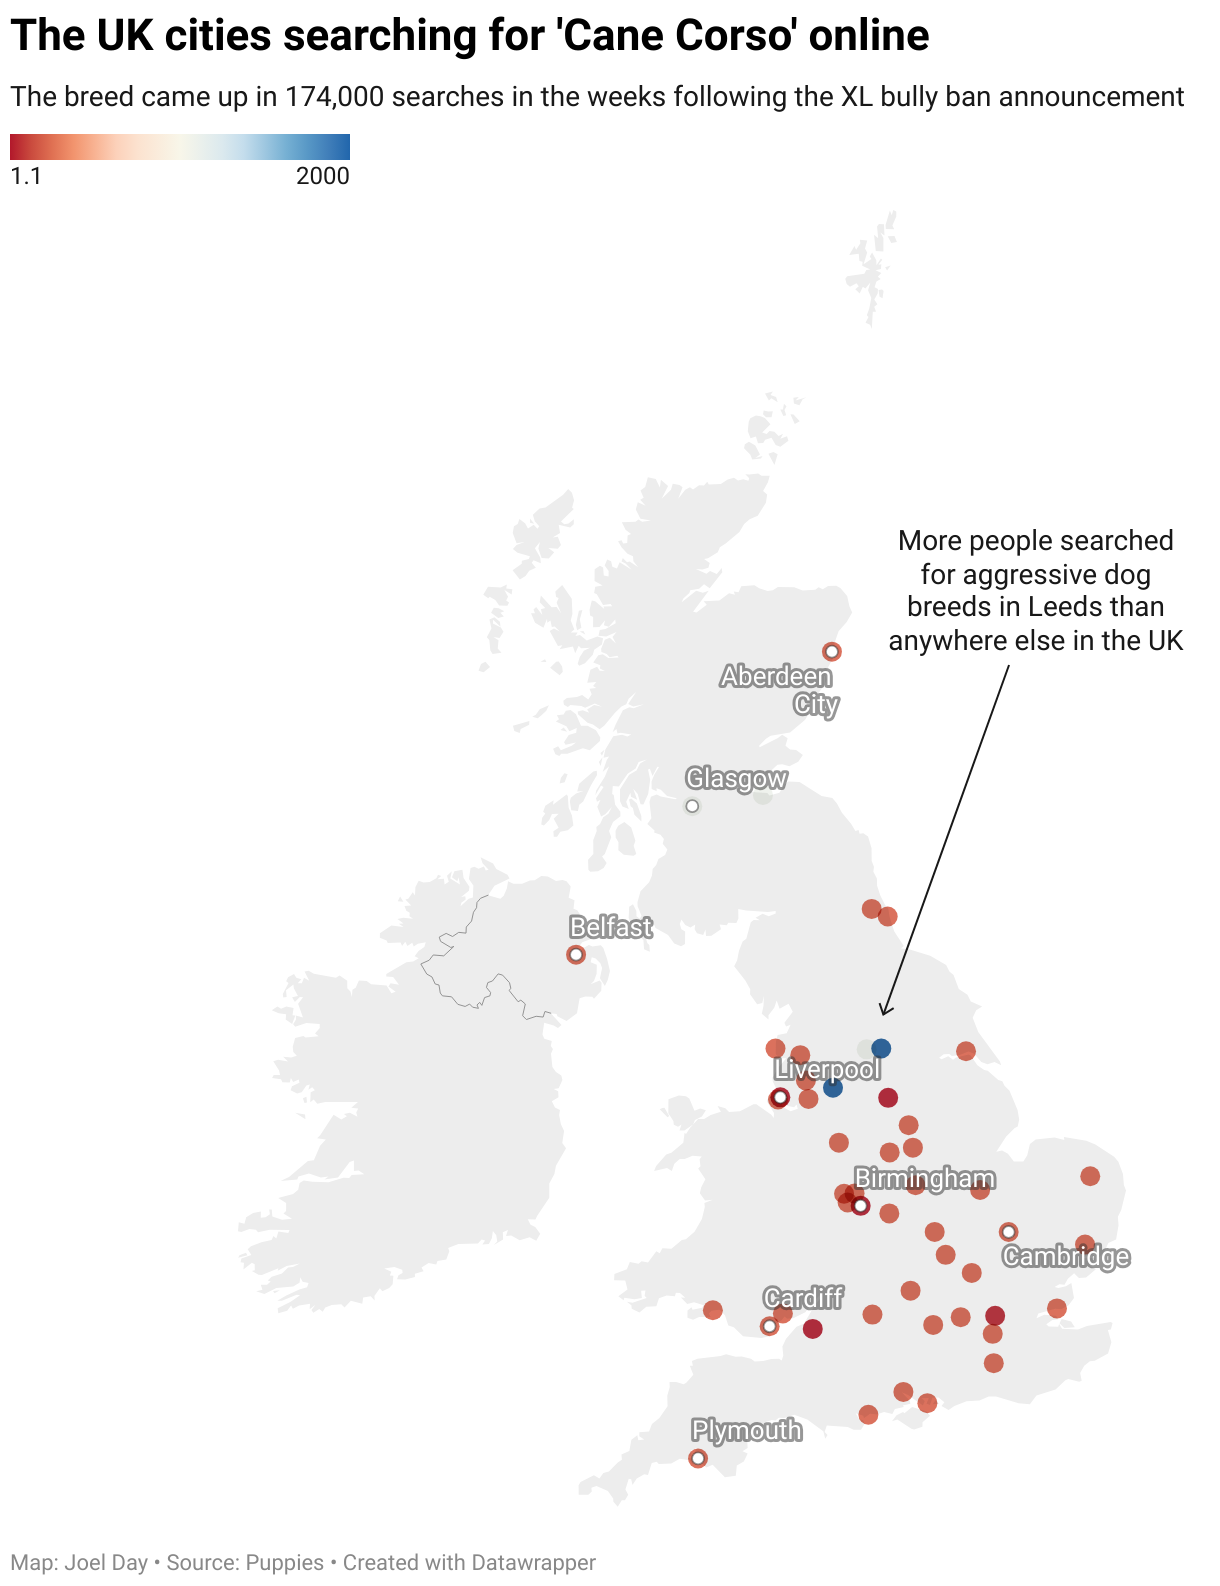 A map showing what cities around the UK searched for Cane Corso in the weeks after the XL Bully ban.